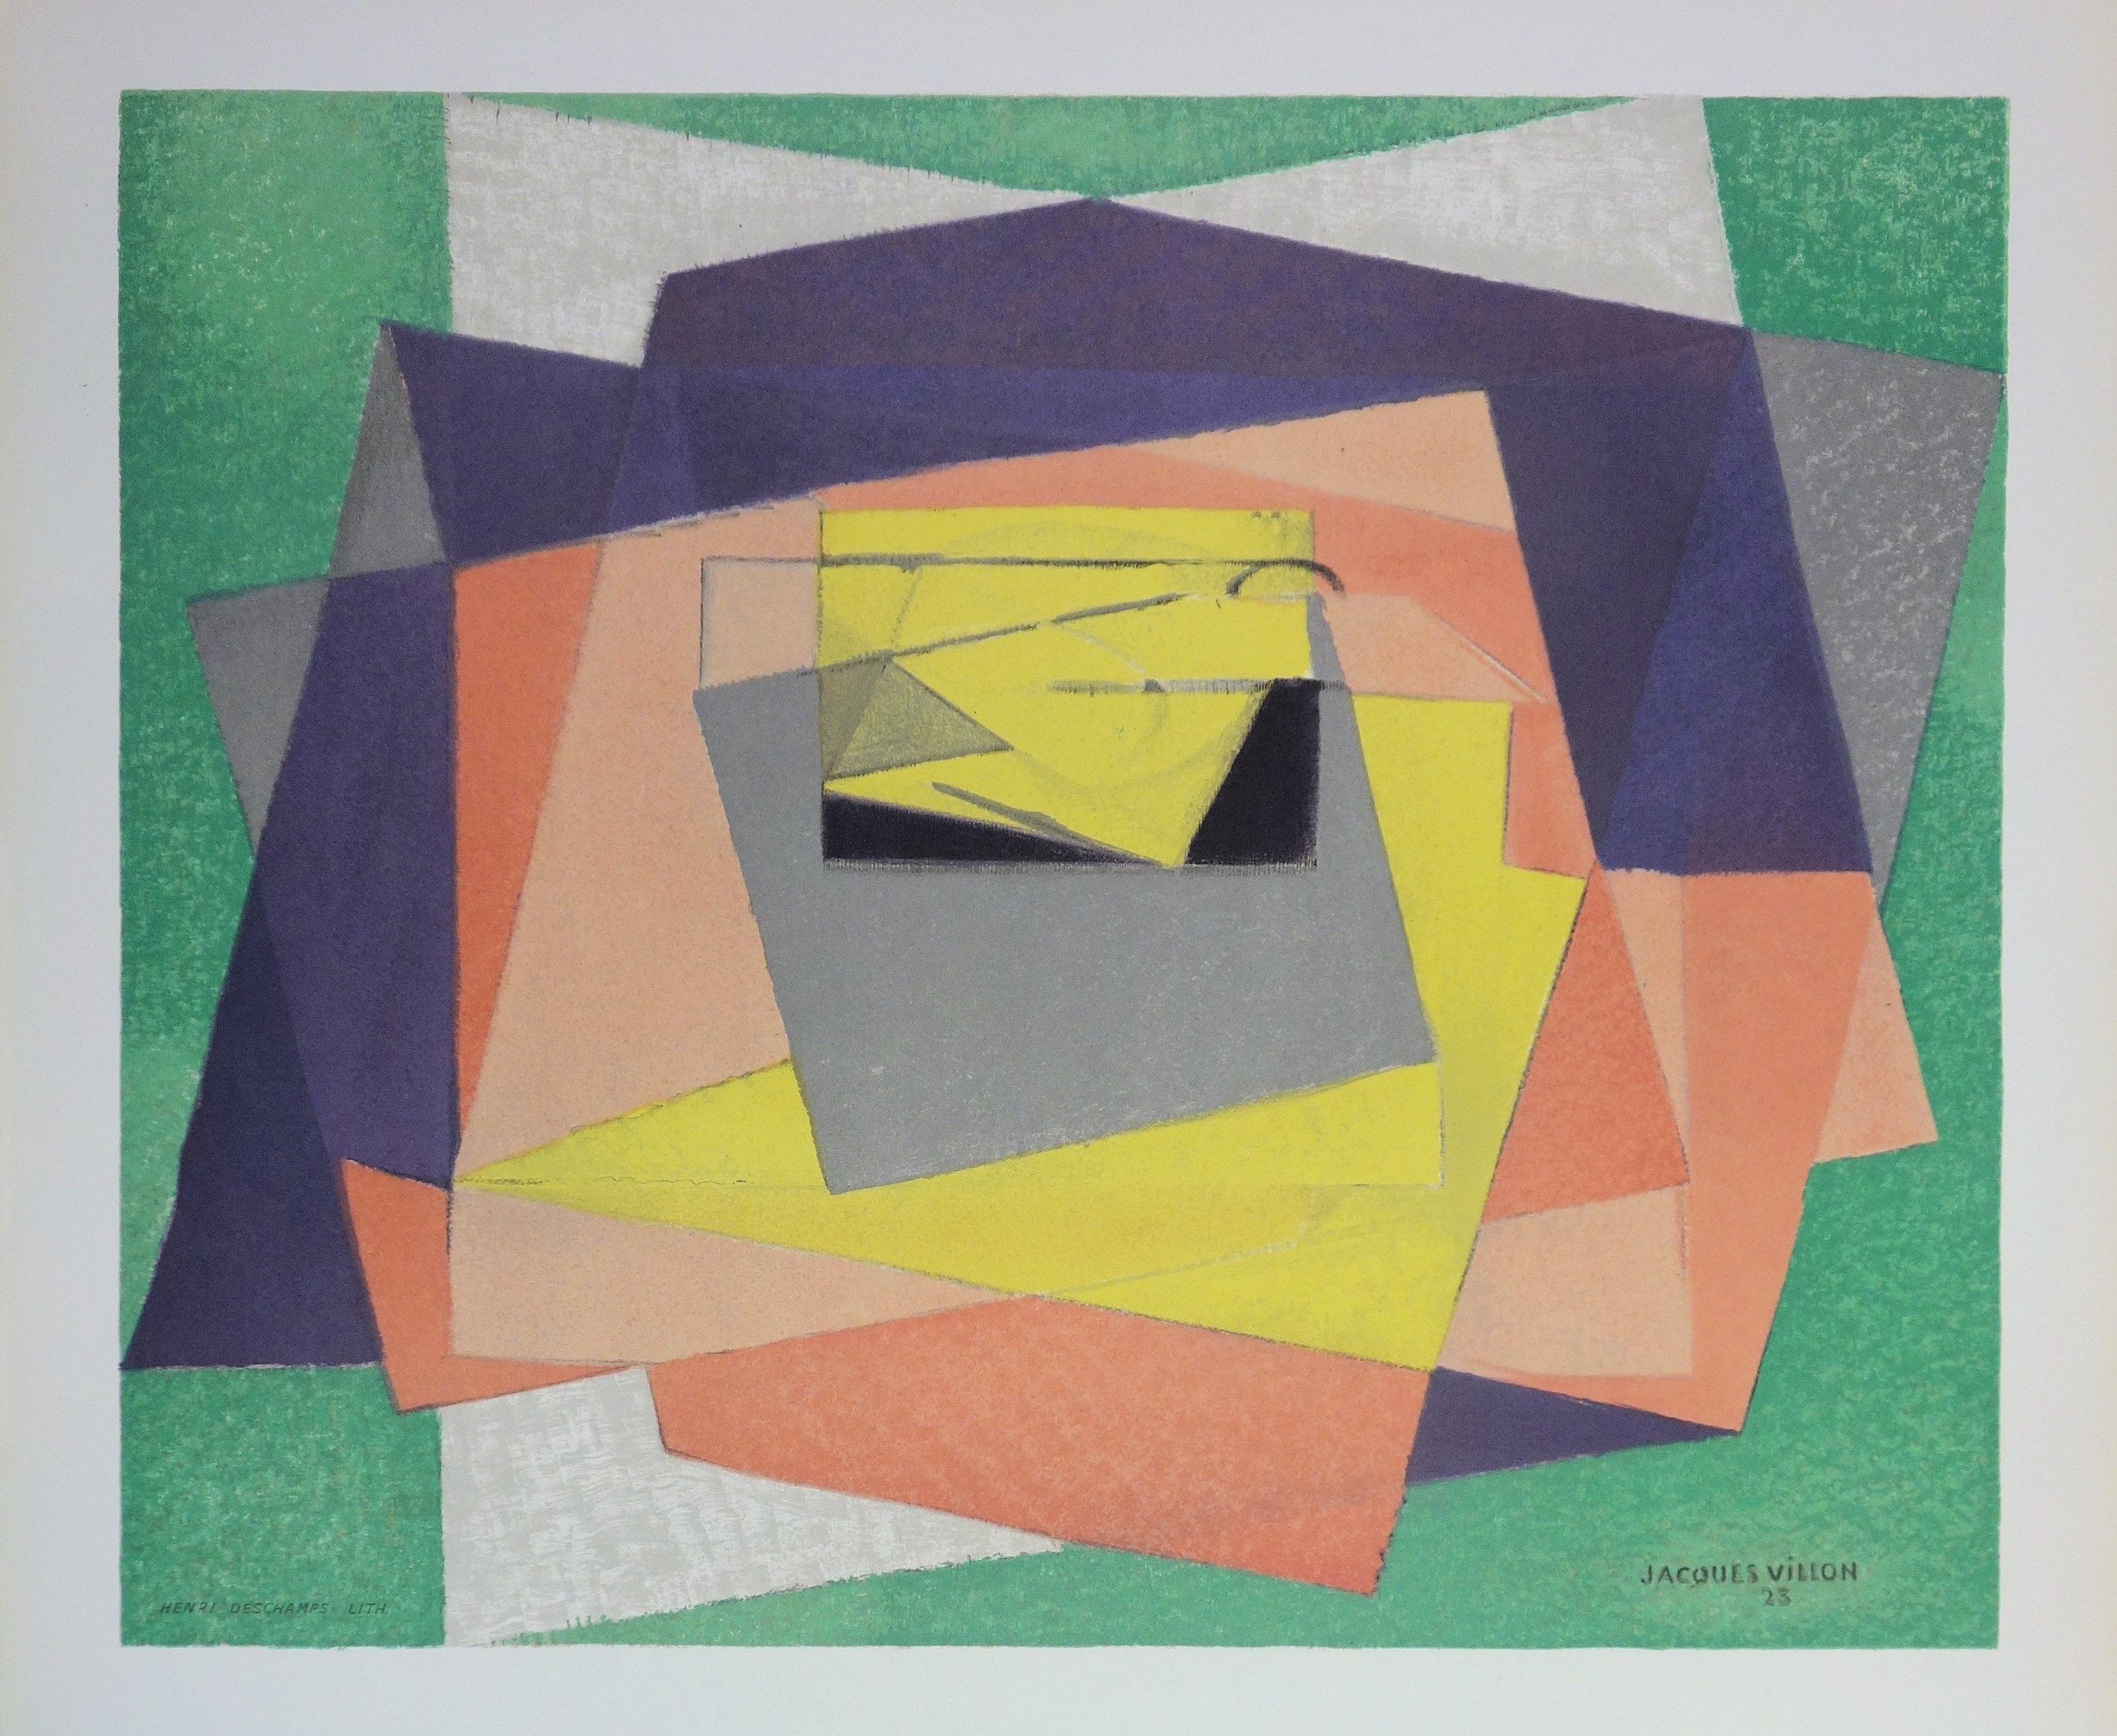 Jacques VILLON (after)
Abstract Cubist Composition

Stone Lithograph (engraved by Deschamps after the painting of Villon)
Printed signature in the plate
Printed in Mourlot workshop in 1961
Created for the exhibition 